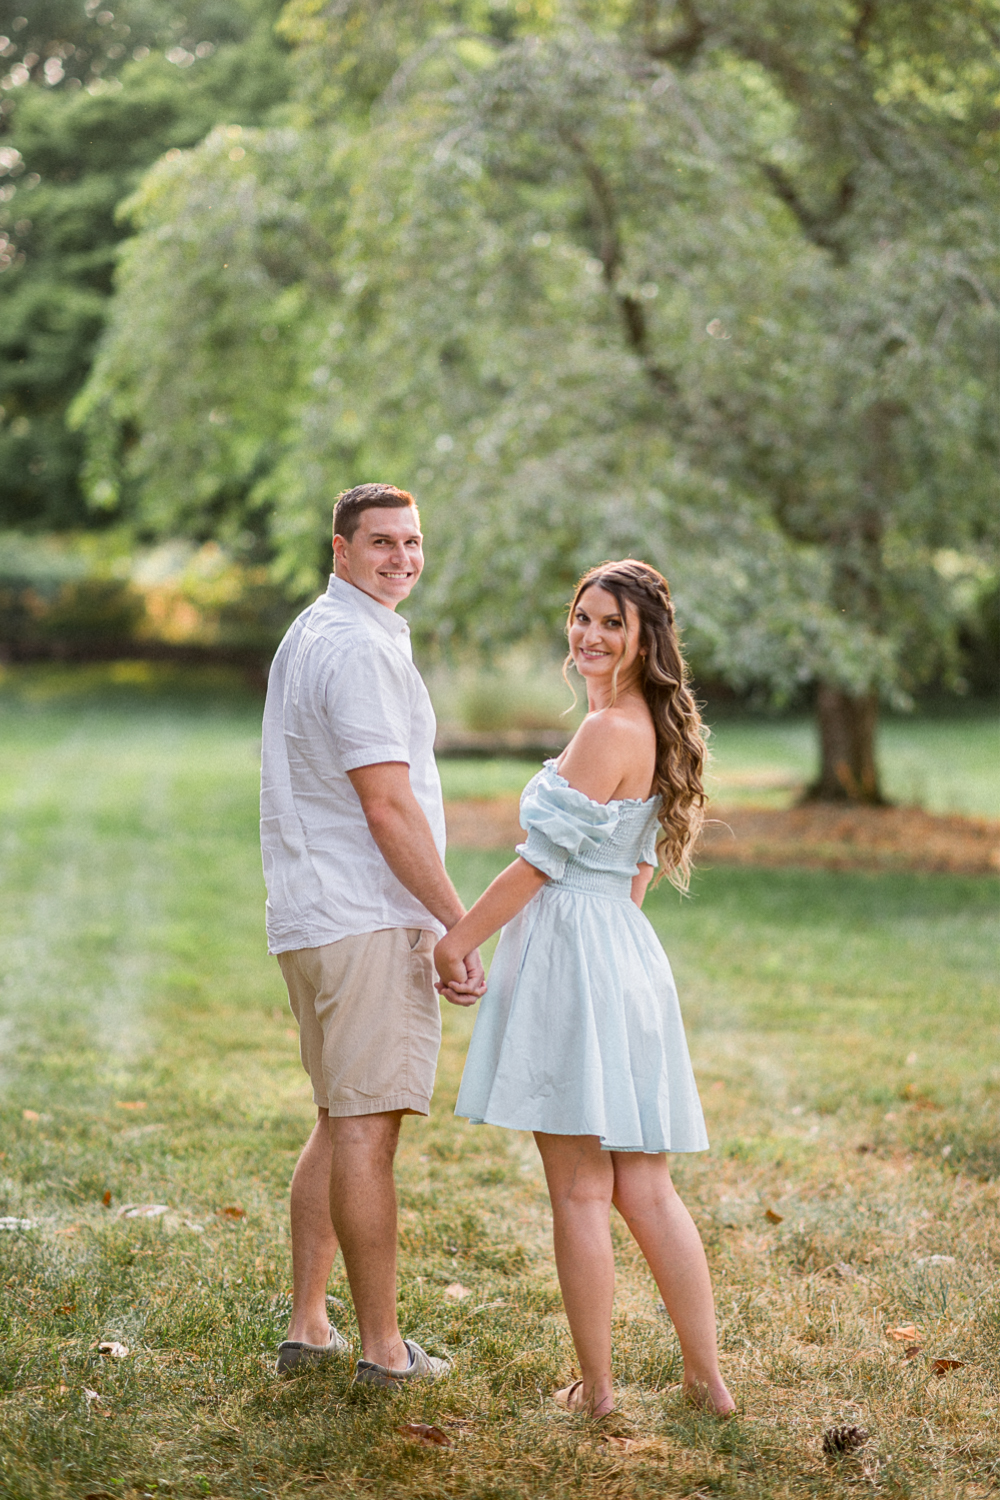 How to get more photography bookings from engagement session couples